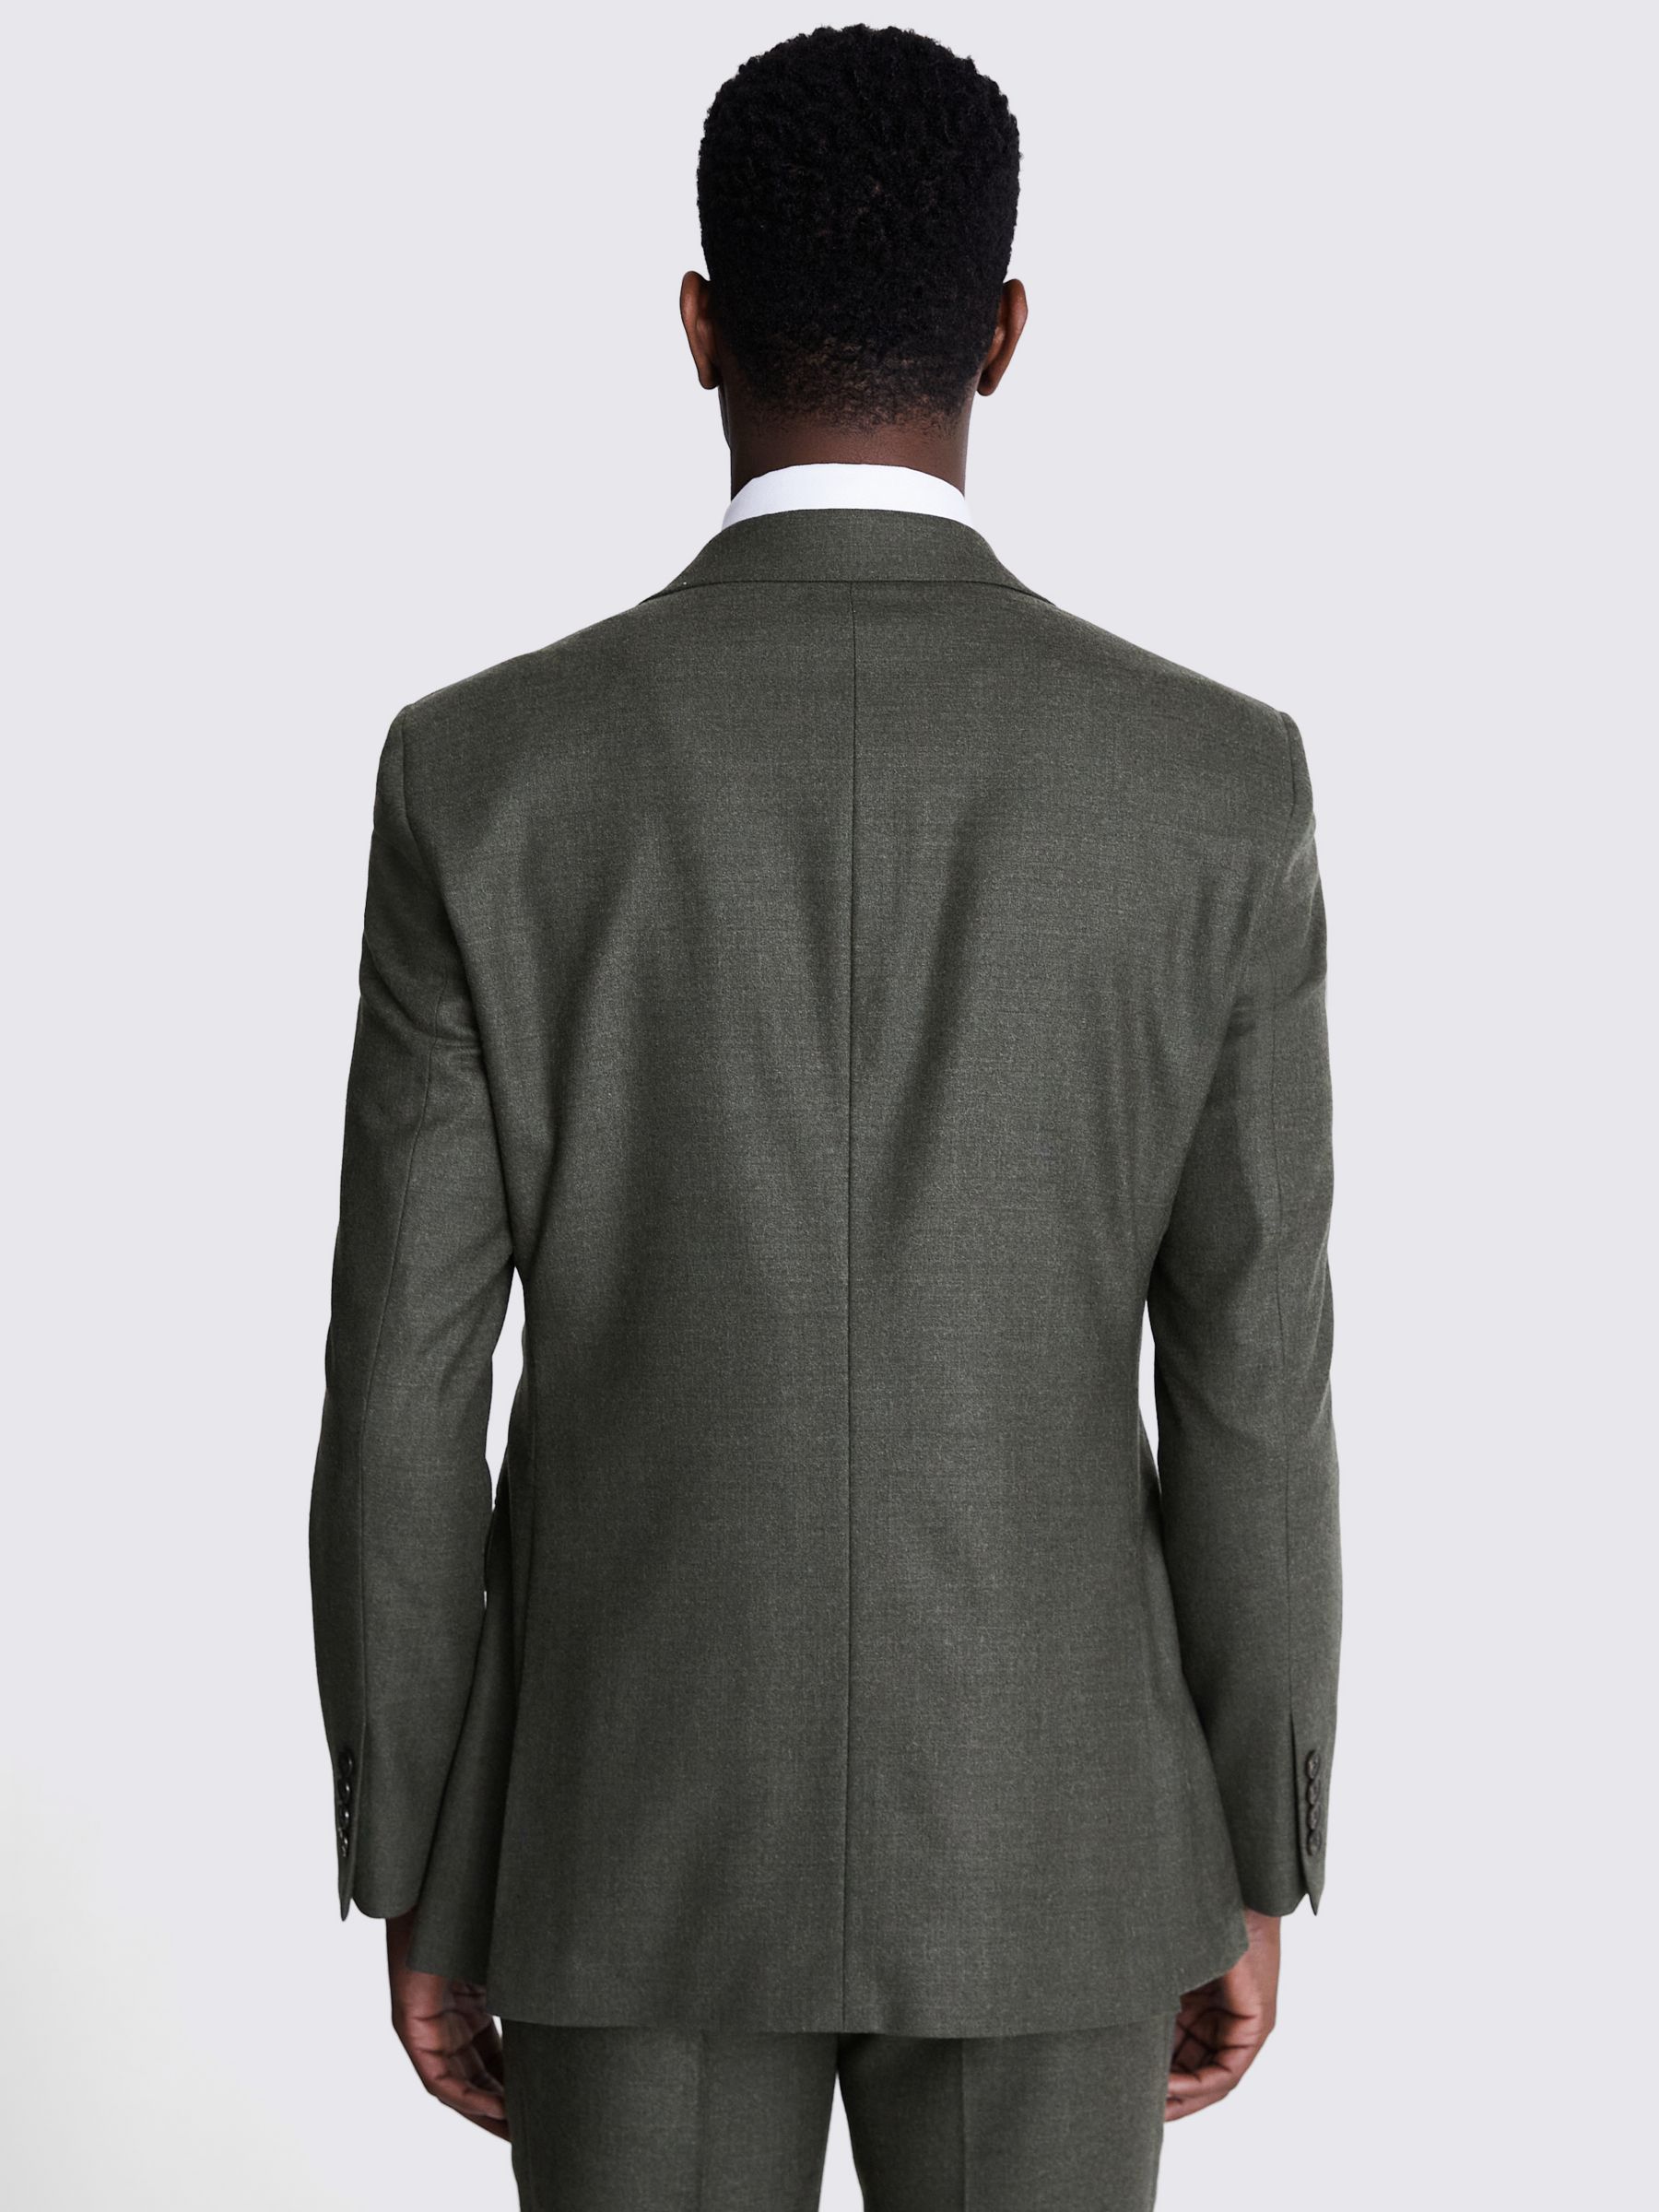 Moss Tailored Fit Performance Suit Jacket, Green, 46R